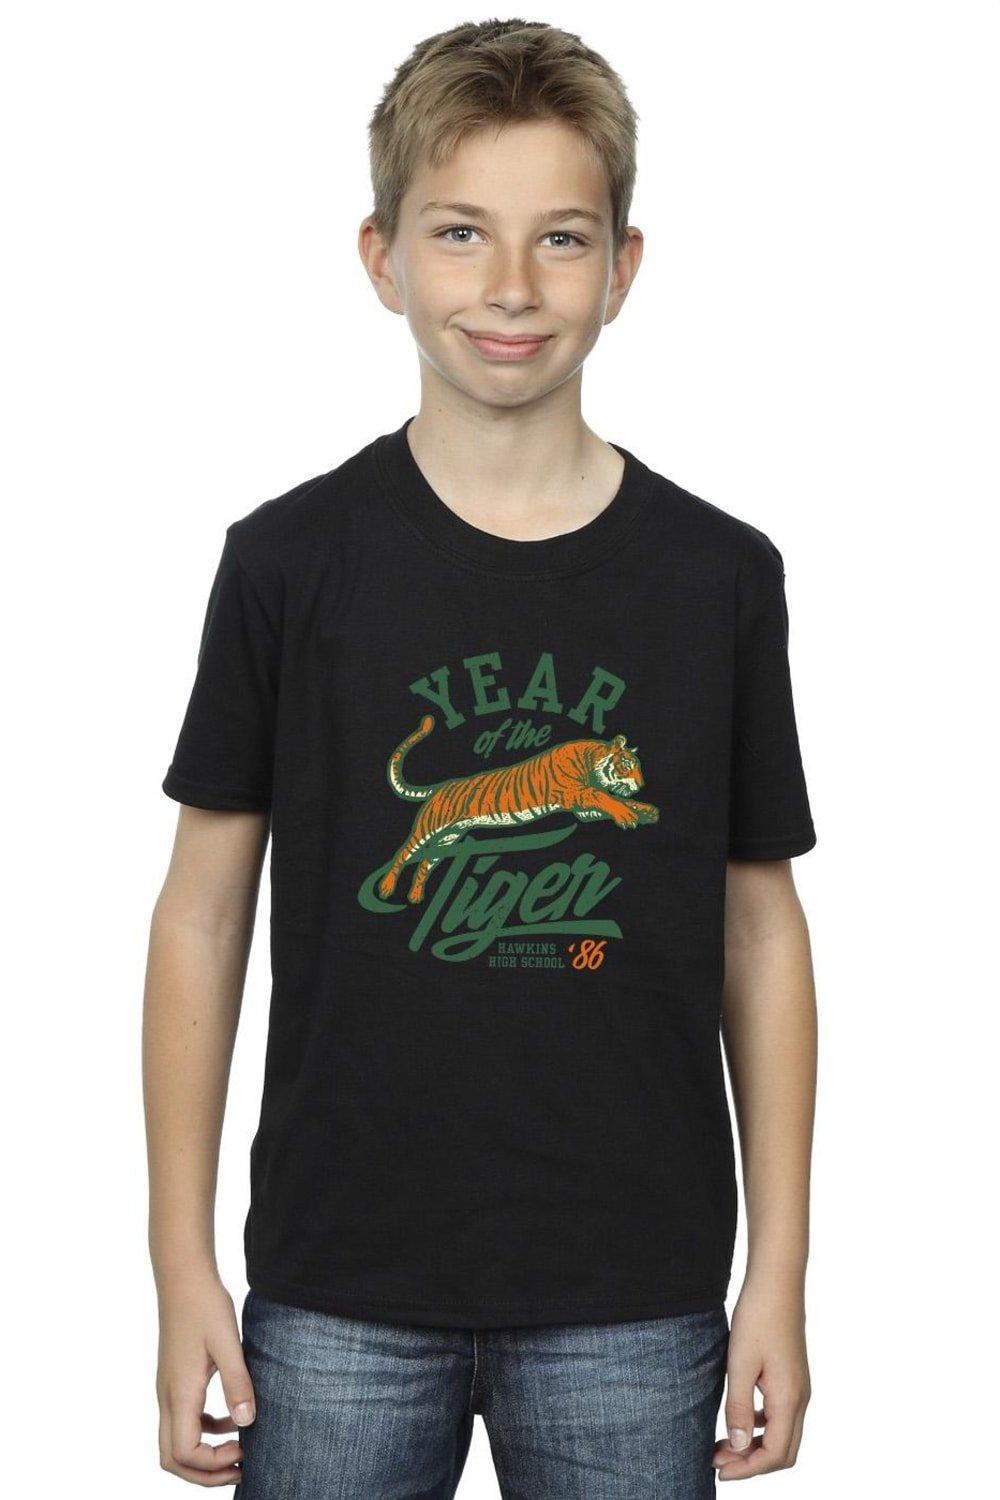 Stranger Things Hawkins Year of The Tiger 86 T-Shirt